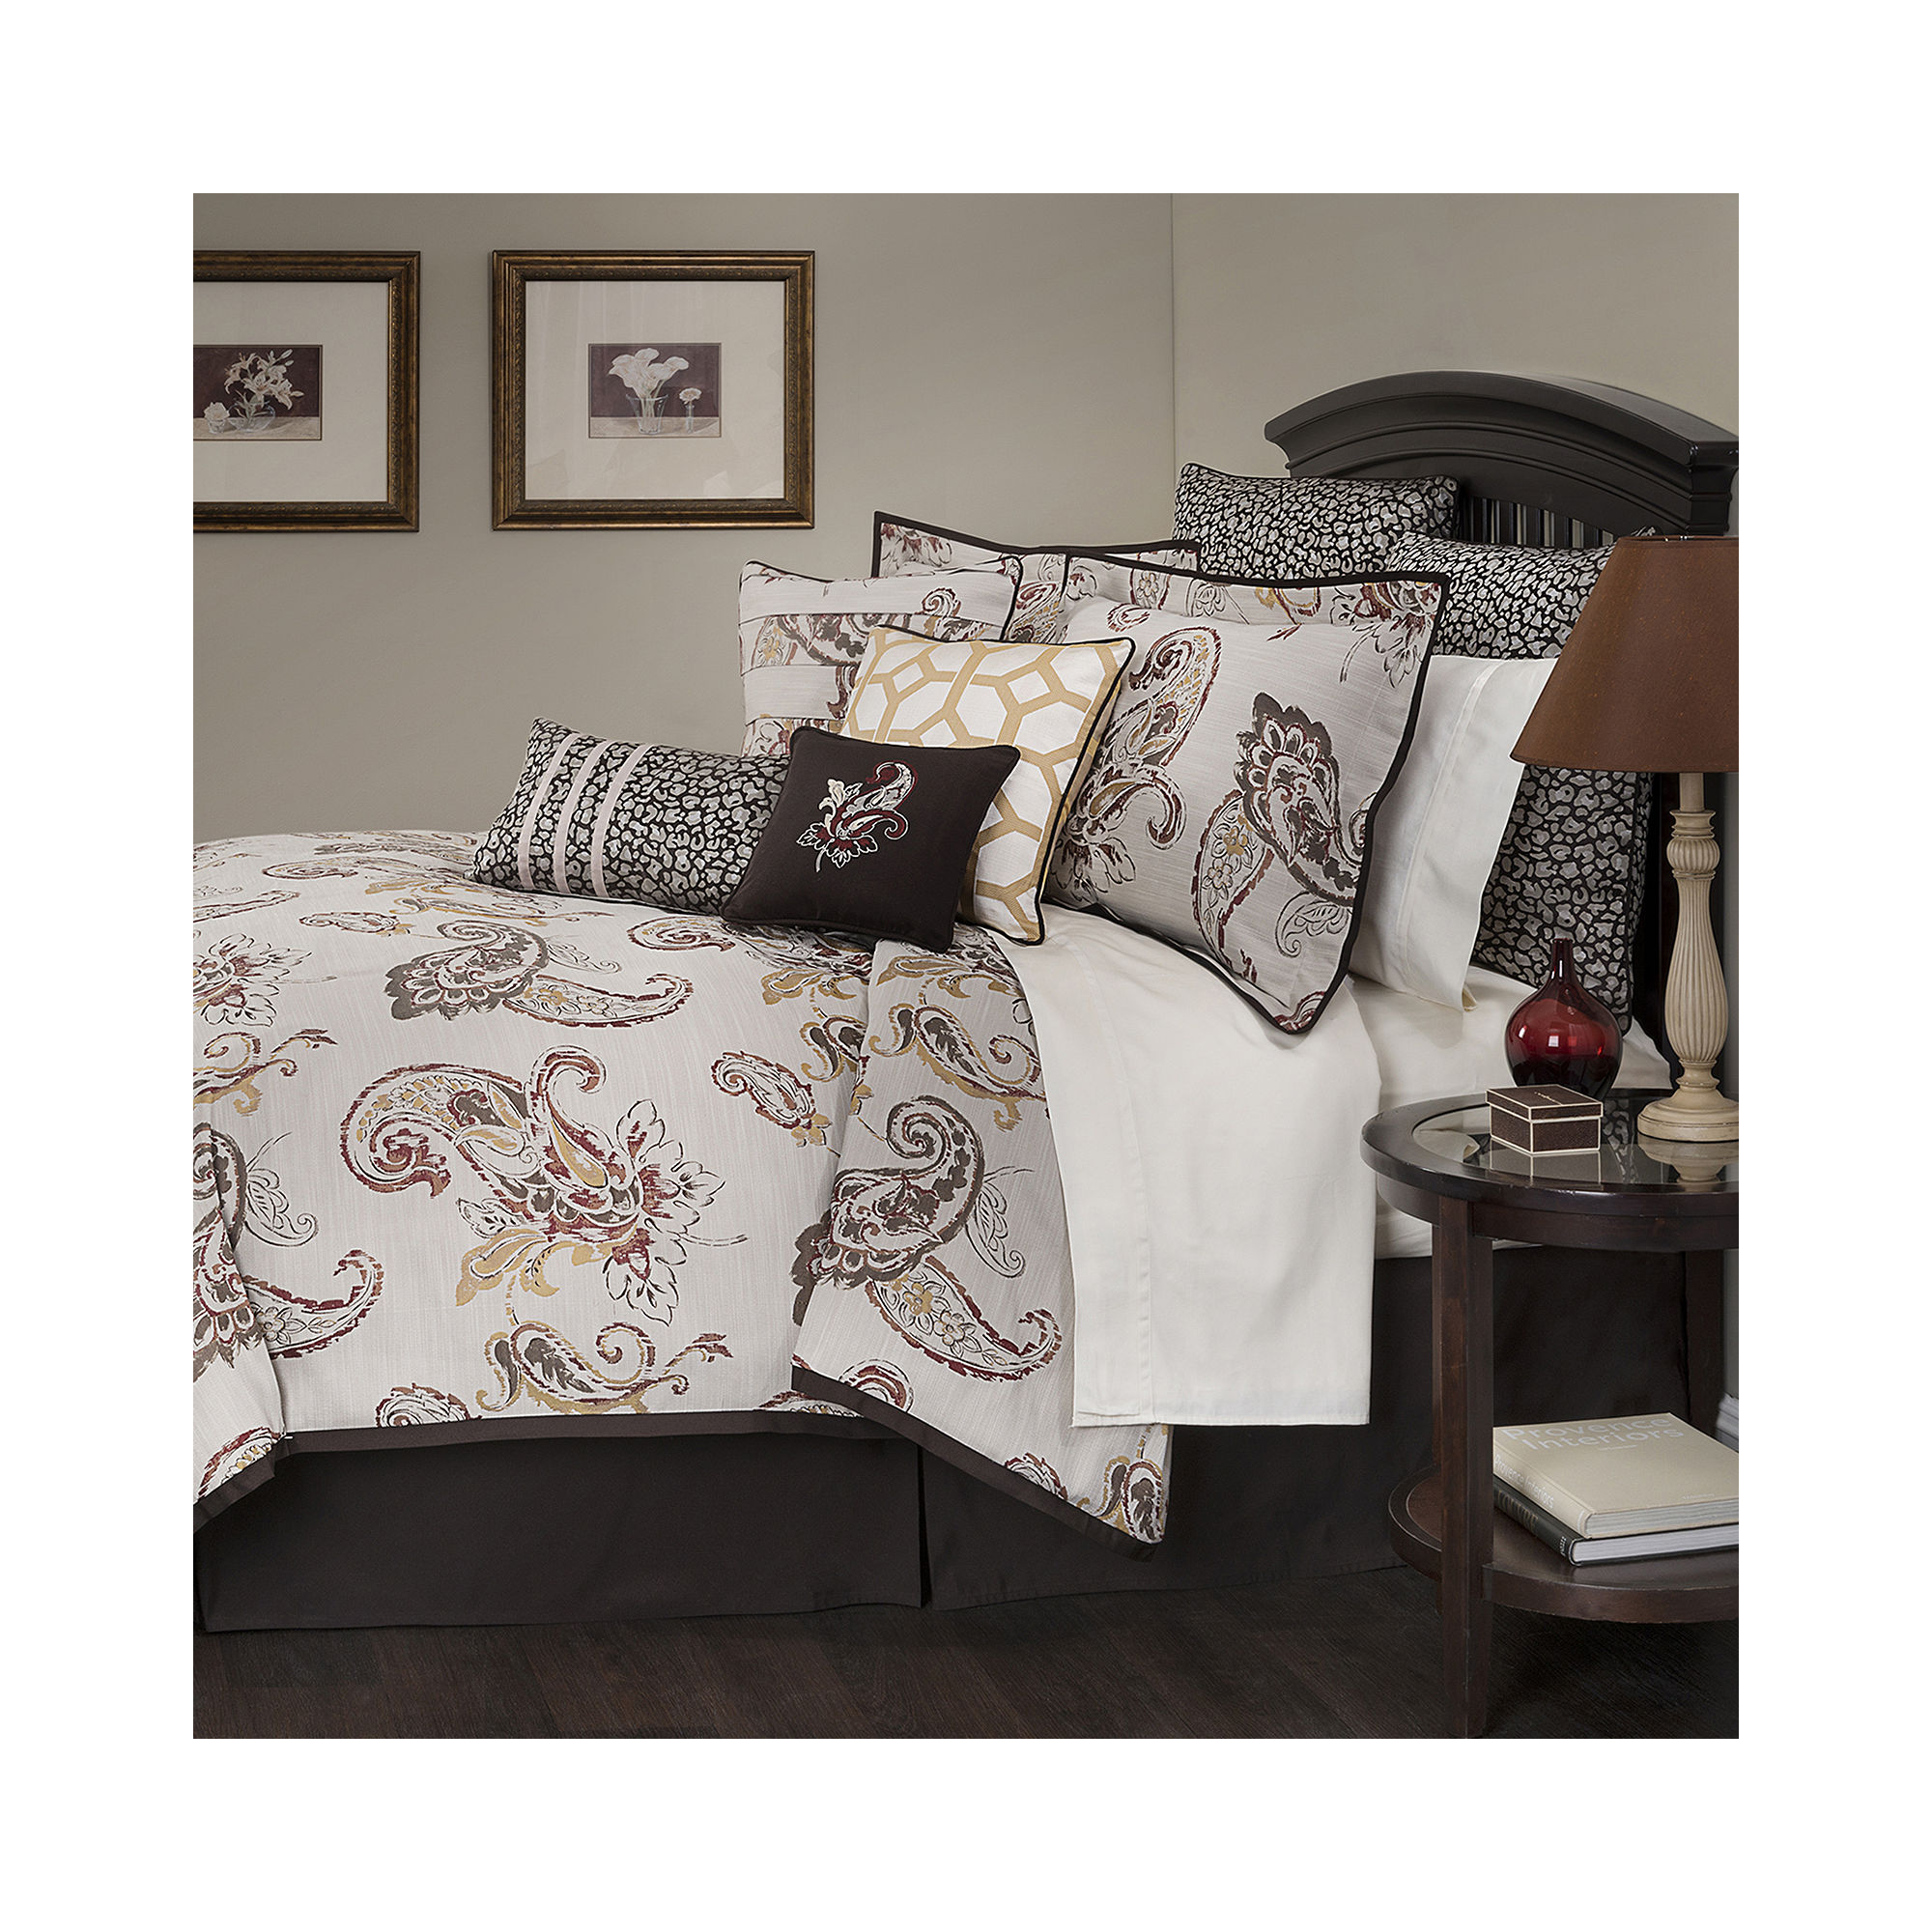 Marquis by Waterford Jalise Paisley 4-pc. Jacquard Comforter Set